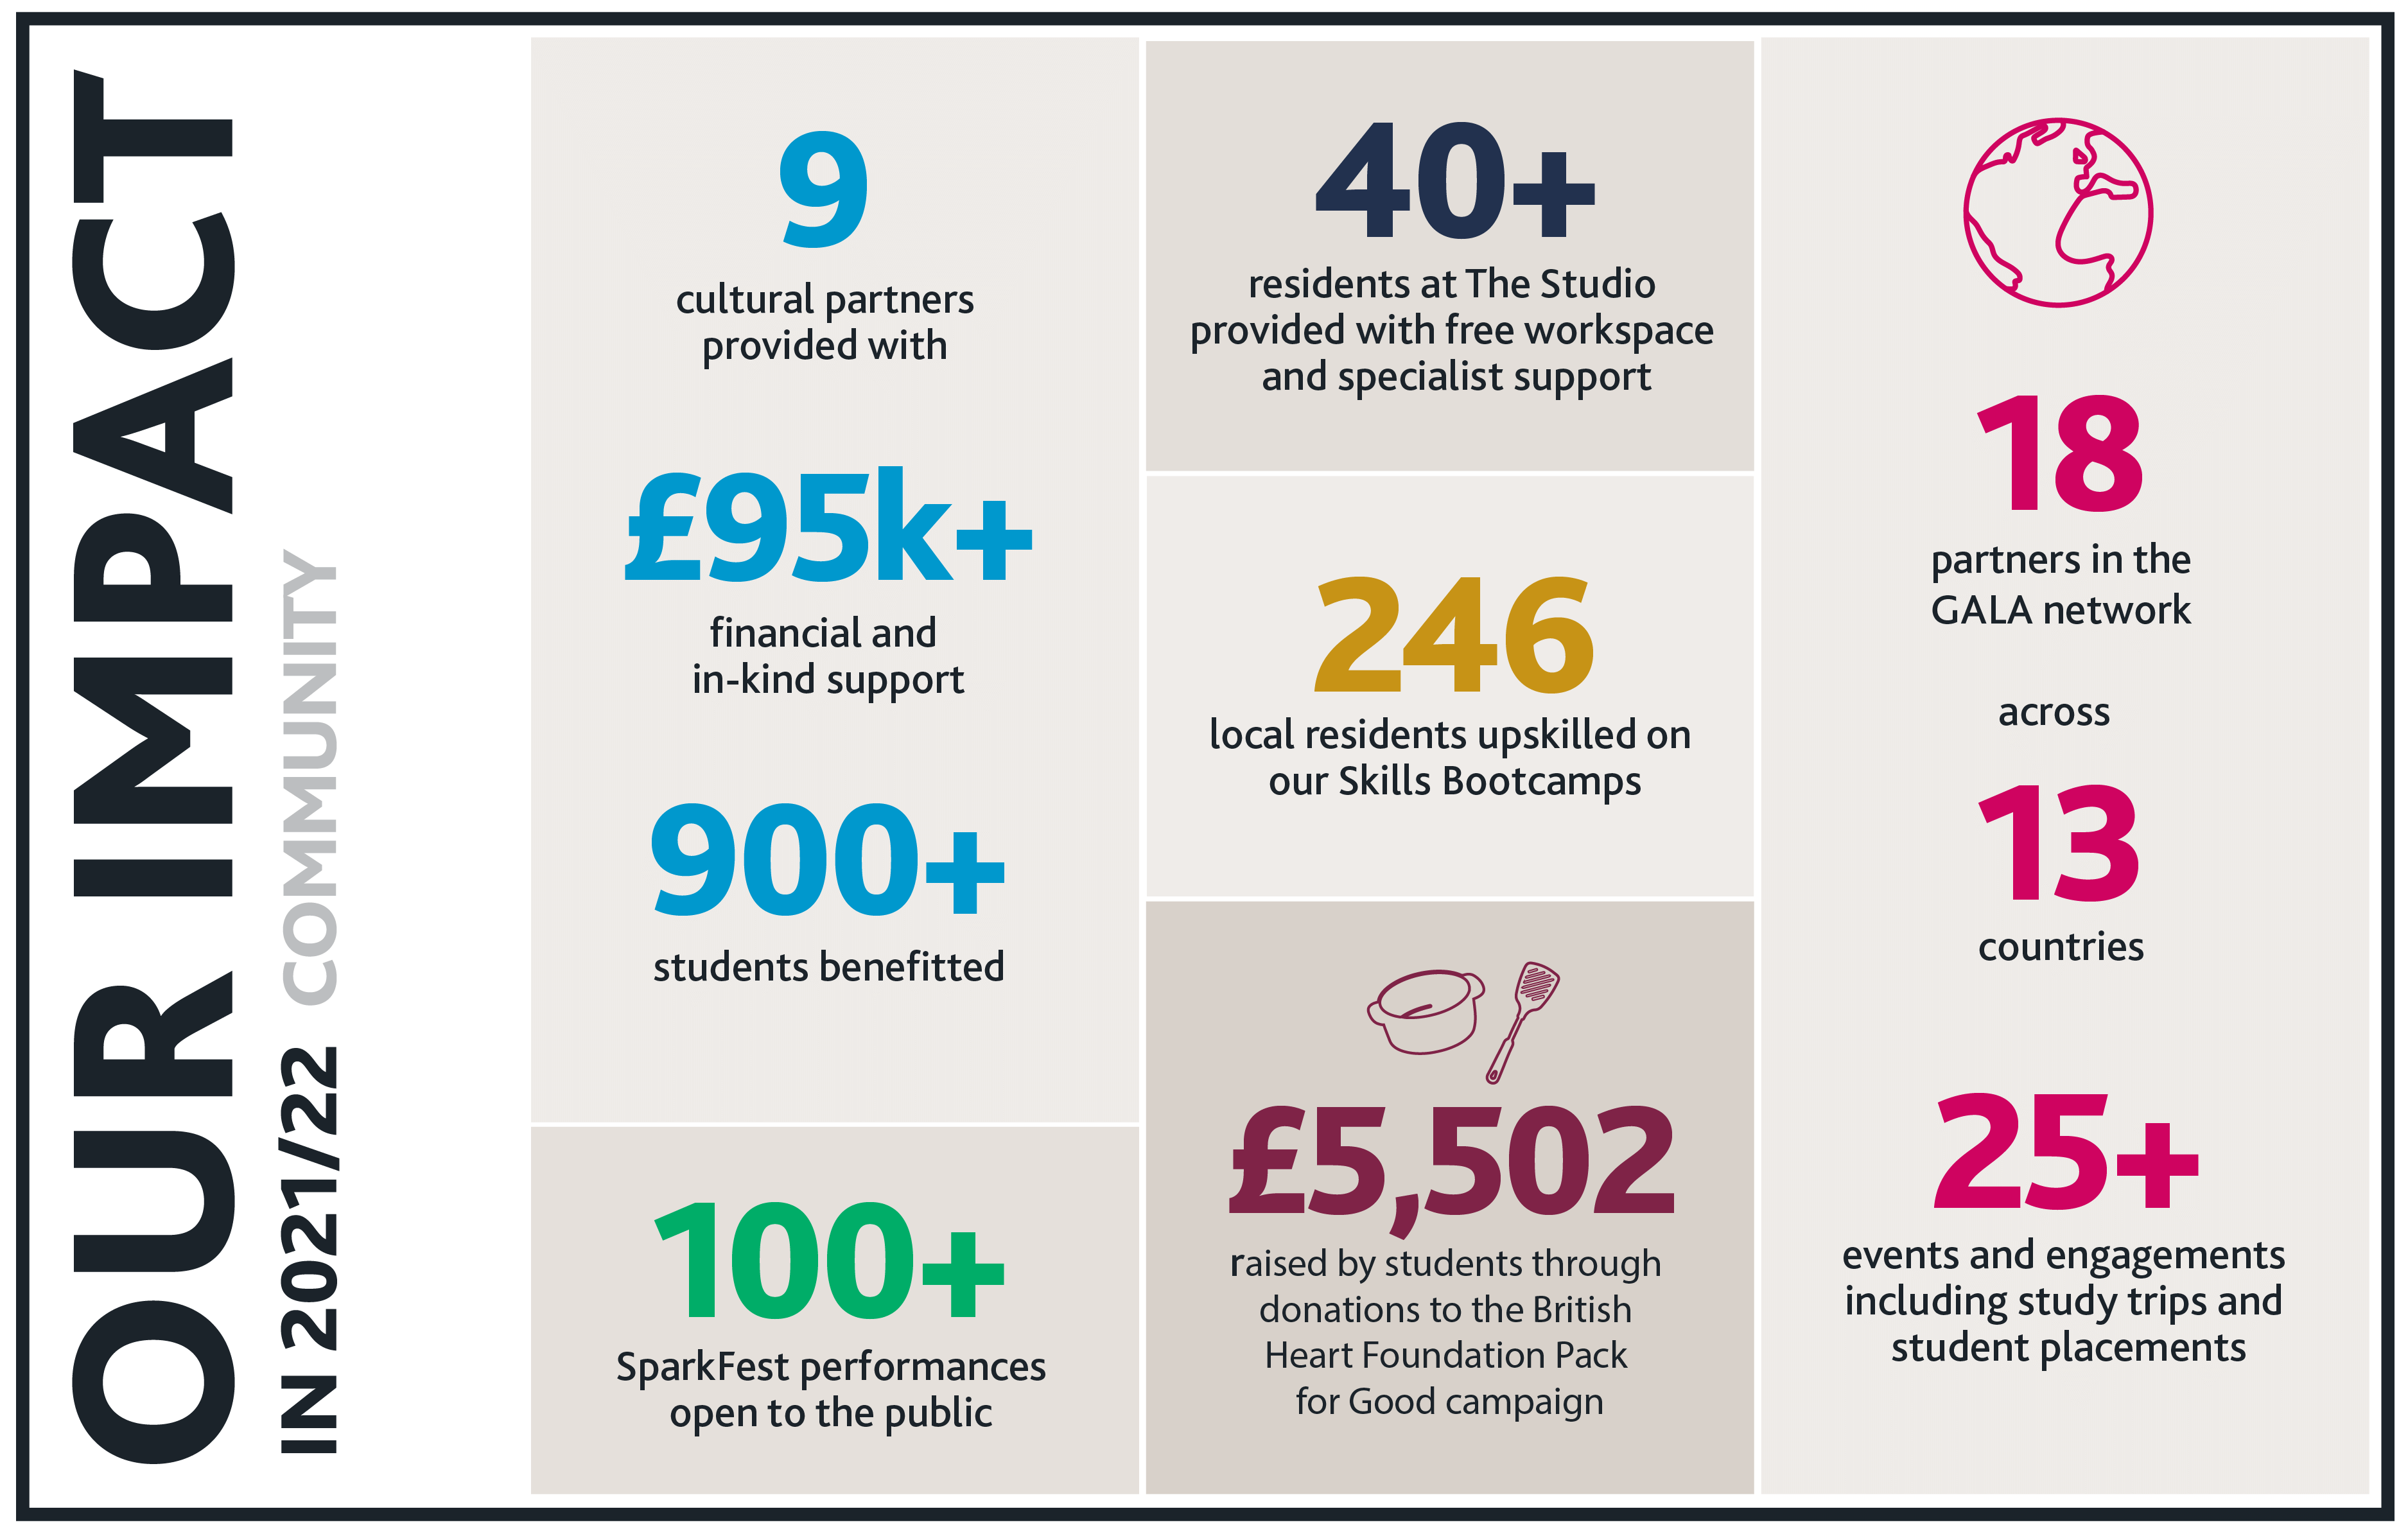 An infographic showing the statistics for our social impact on the community in the academic year 2021/22